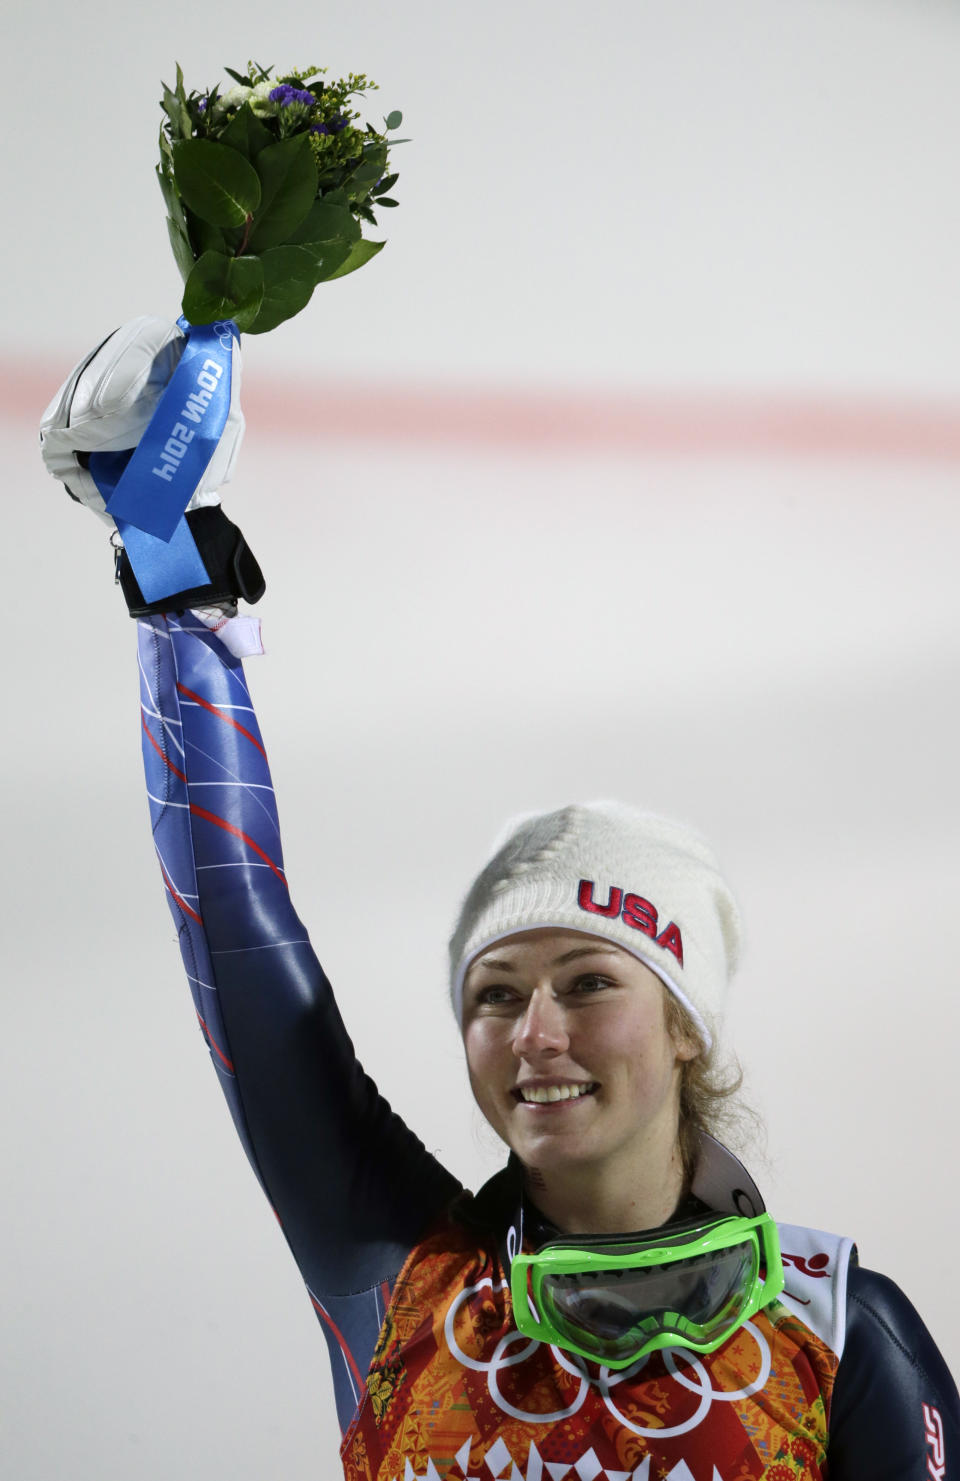 Women's slalom gold medal winner Mikaela Shiffrin of the United States holds up her bouquet at a flower ceremony at the Sochi 2014 Winter Olympics, Friday, Feb. 21, 2014, in Krasnaya Polyana, Russia.(AP Photo/Gero Breloer)